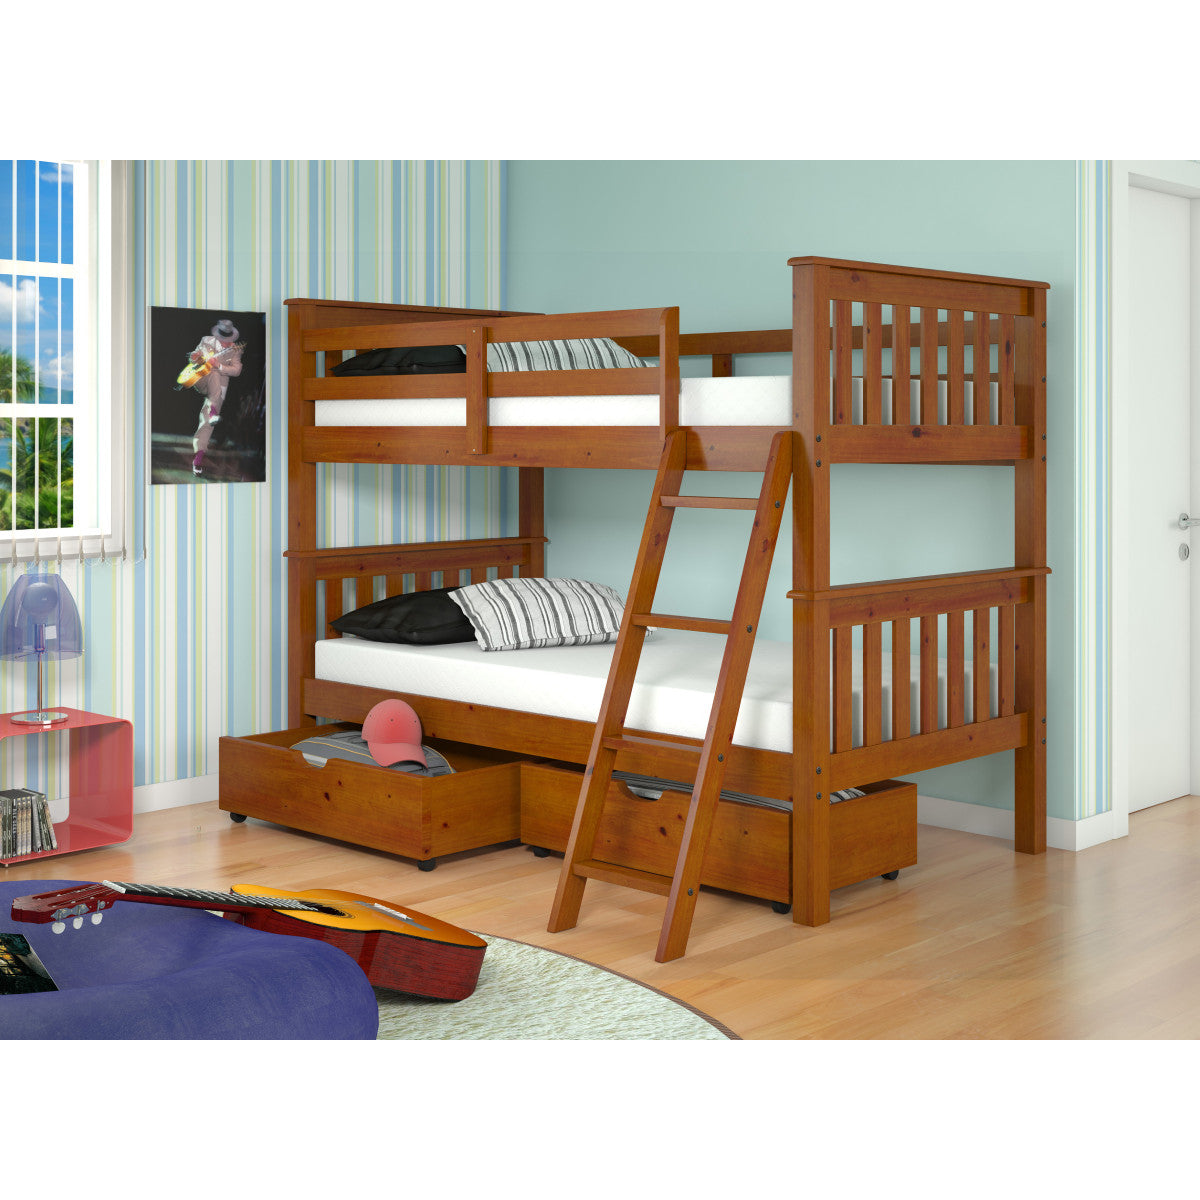 TWIN/TWIN MISSION BUNK BED WITH DUAL UNDERBED DRAWERS LIGHT ESPRESSO FINISH